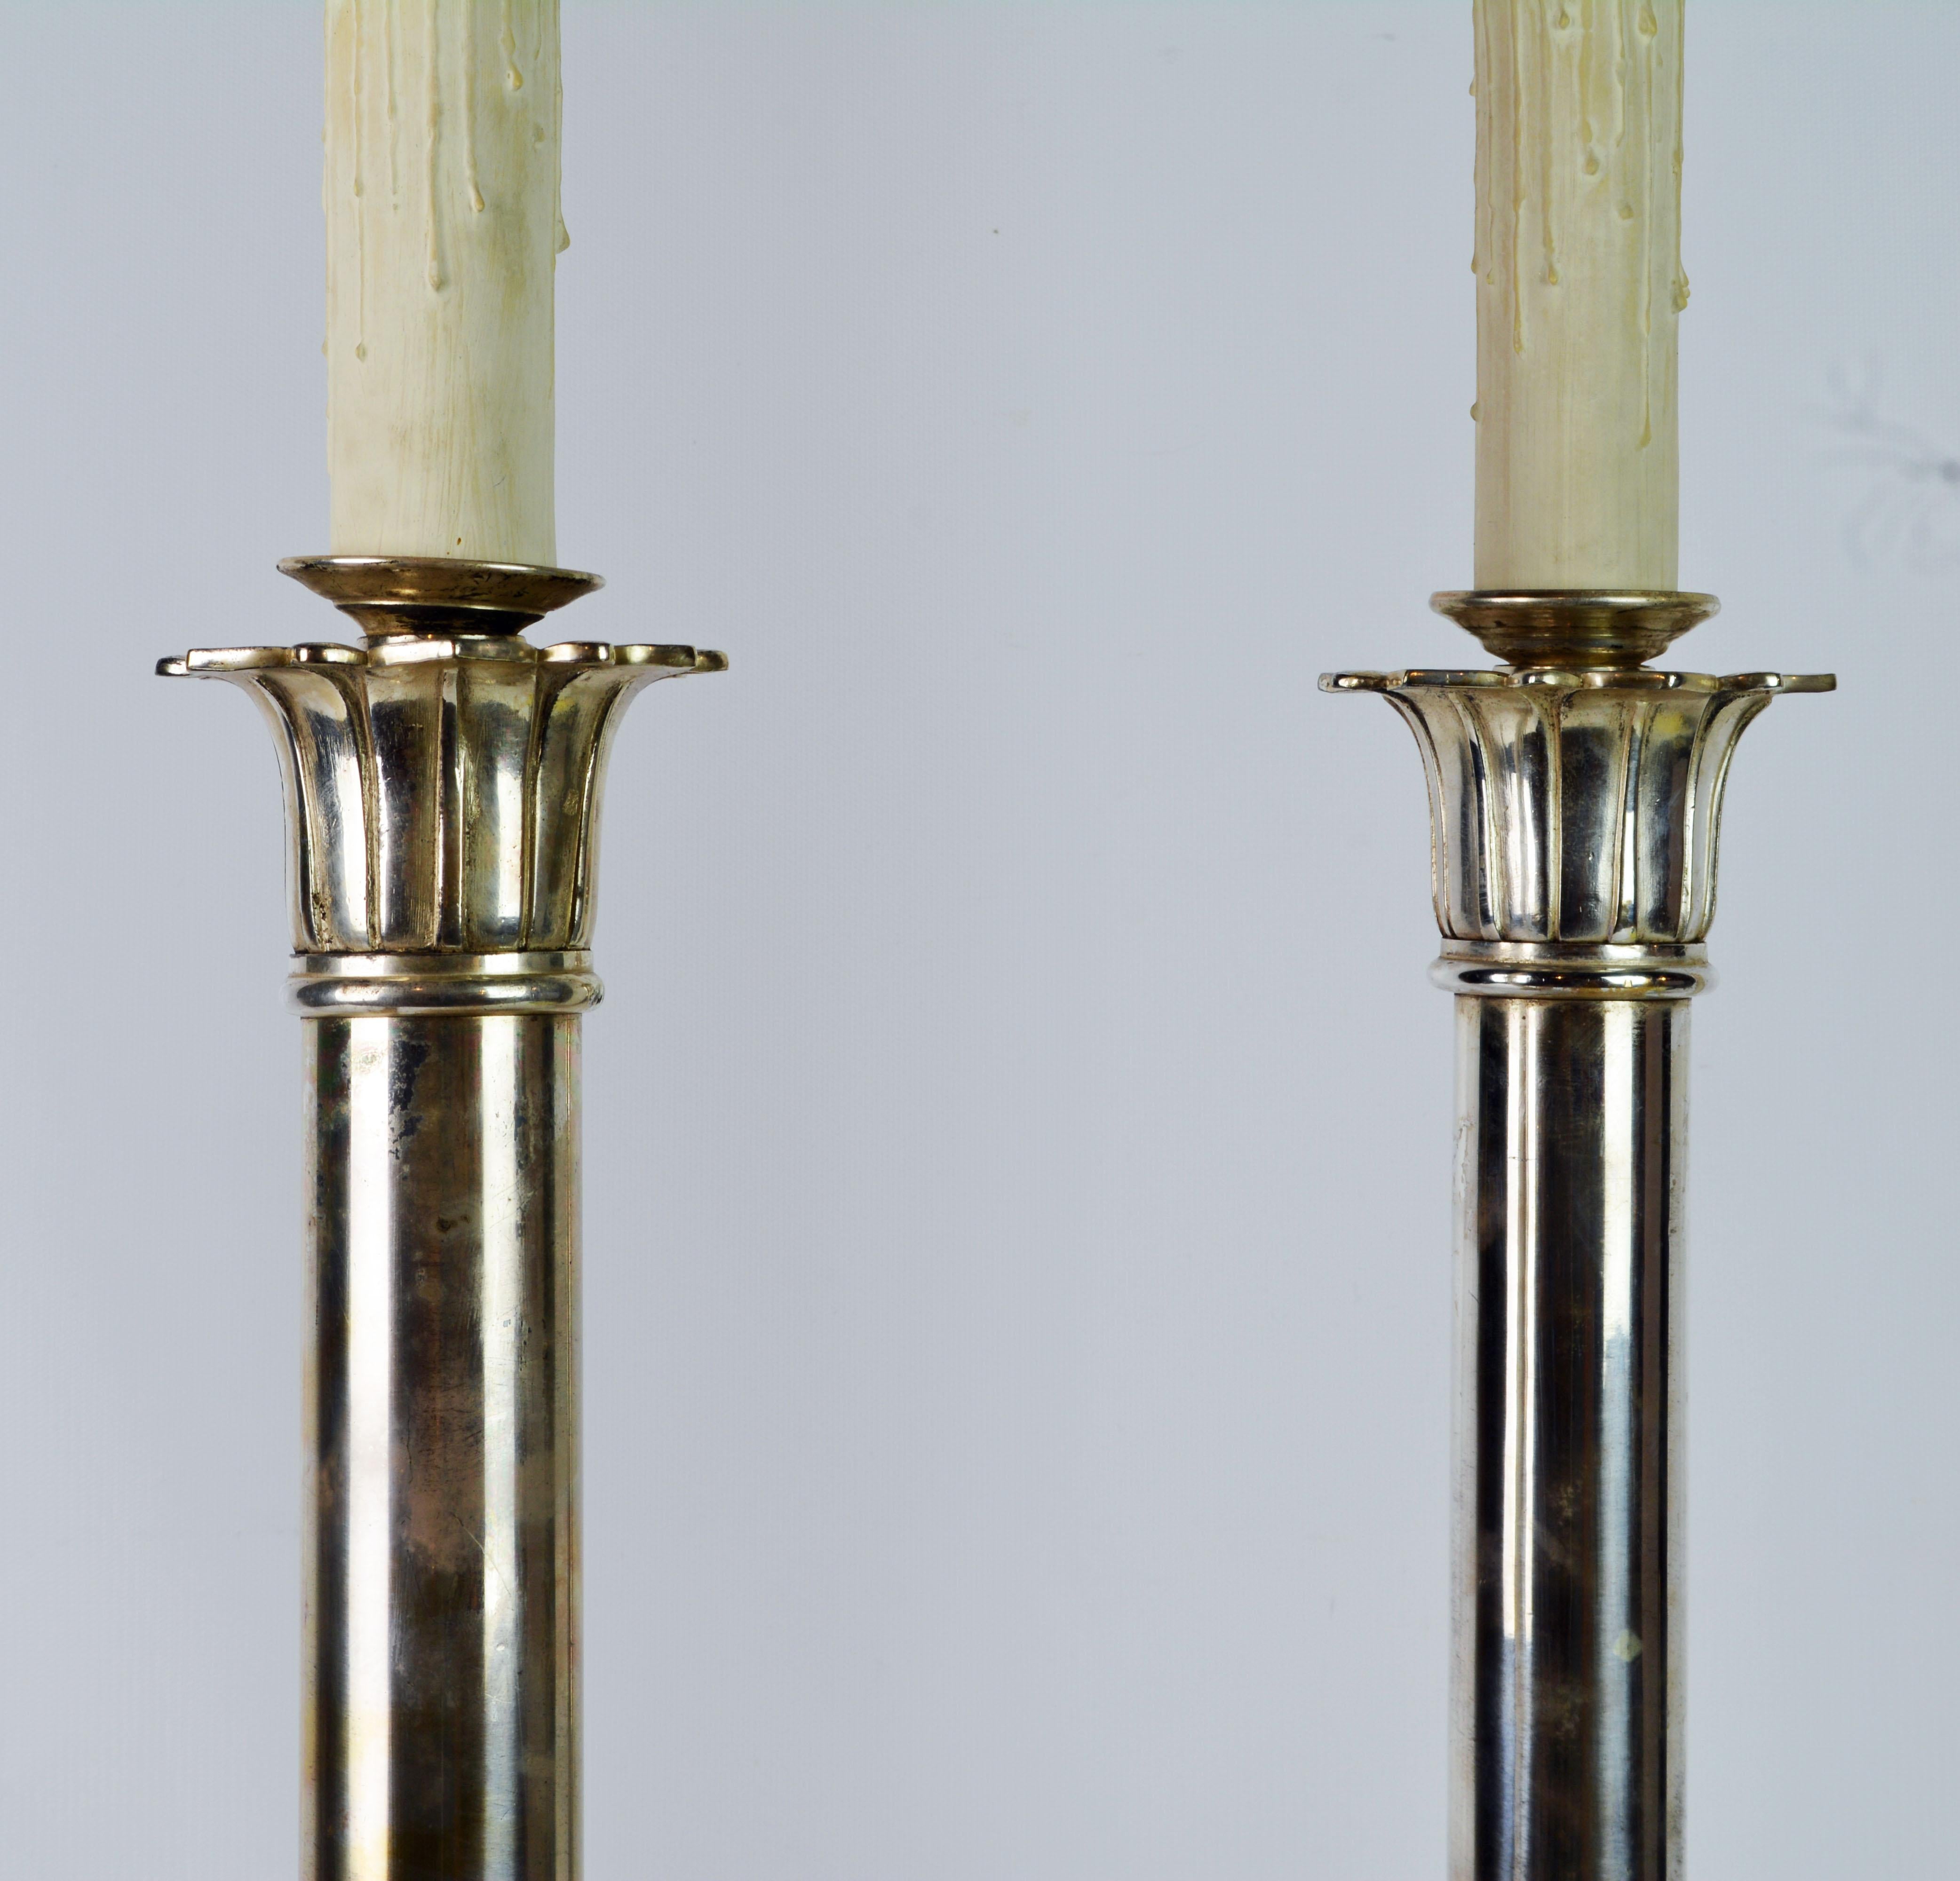 Pair of Tall Early 20th Century English Edwardian Silver Plated Column Lamps 1